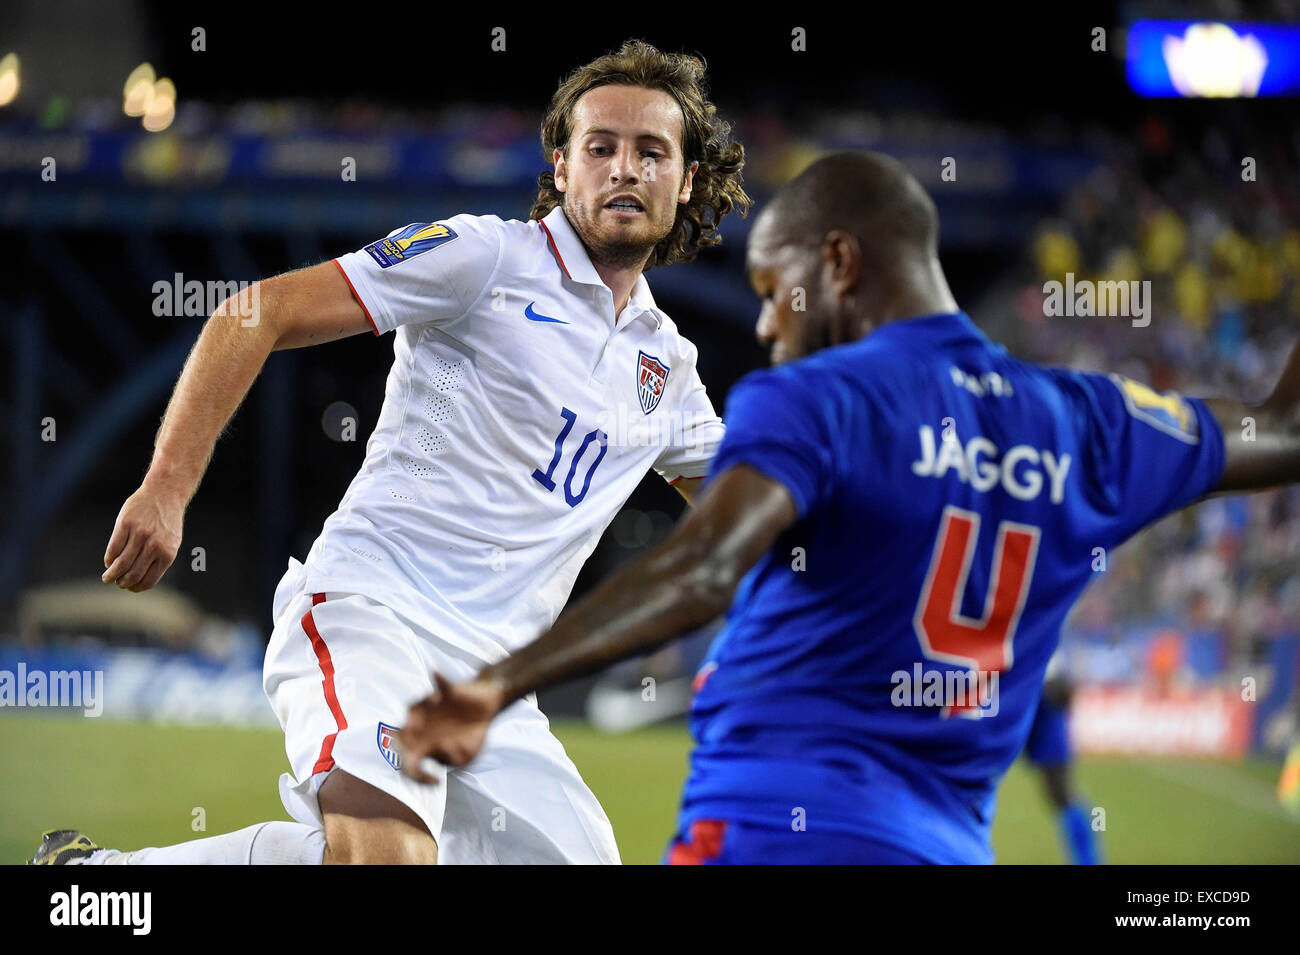 Foxborough, Massachusetts, USA. 10th July, 2015. United States midfielder Mix Diskerud (10) in game action during the CONCACAF Gold Cup group stage match between USA and Haiti held at Gillette Stadium, in Foxborough Massachusetts. USA defeated Haiti 1-0. Eric Canha/CSM/Alamy Live News Stock Photo